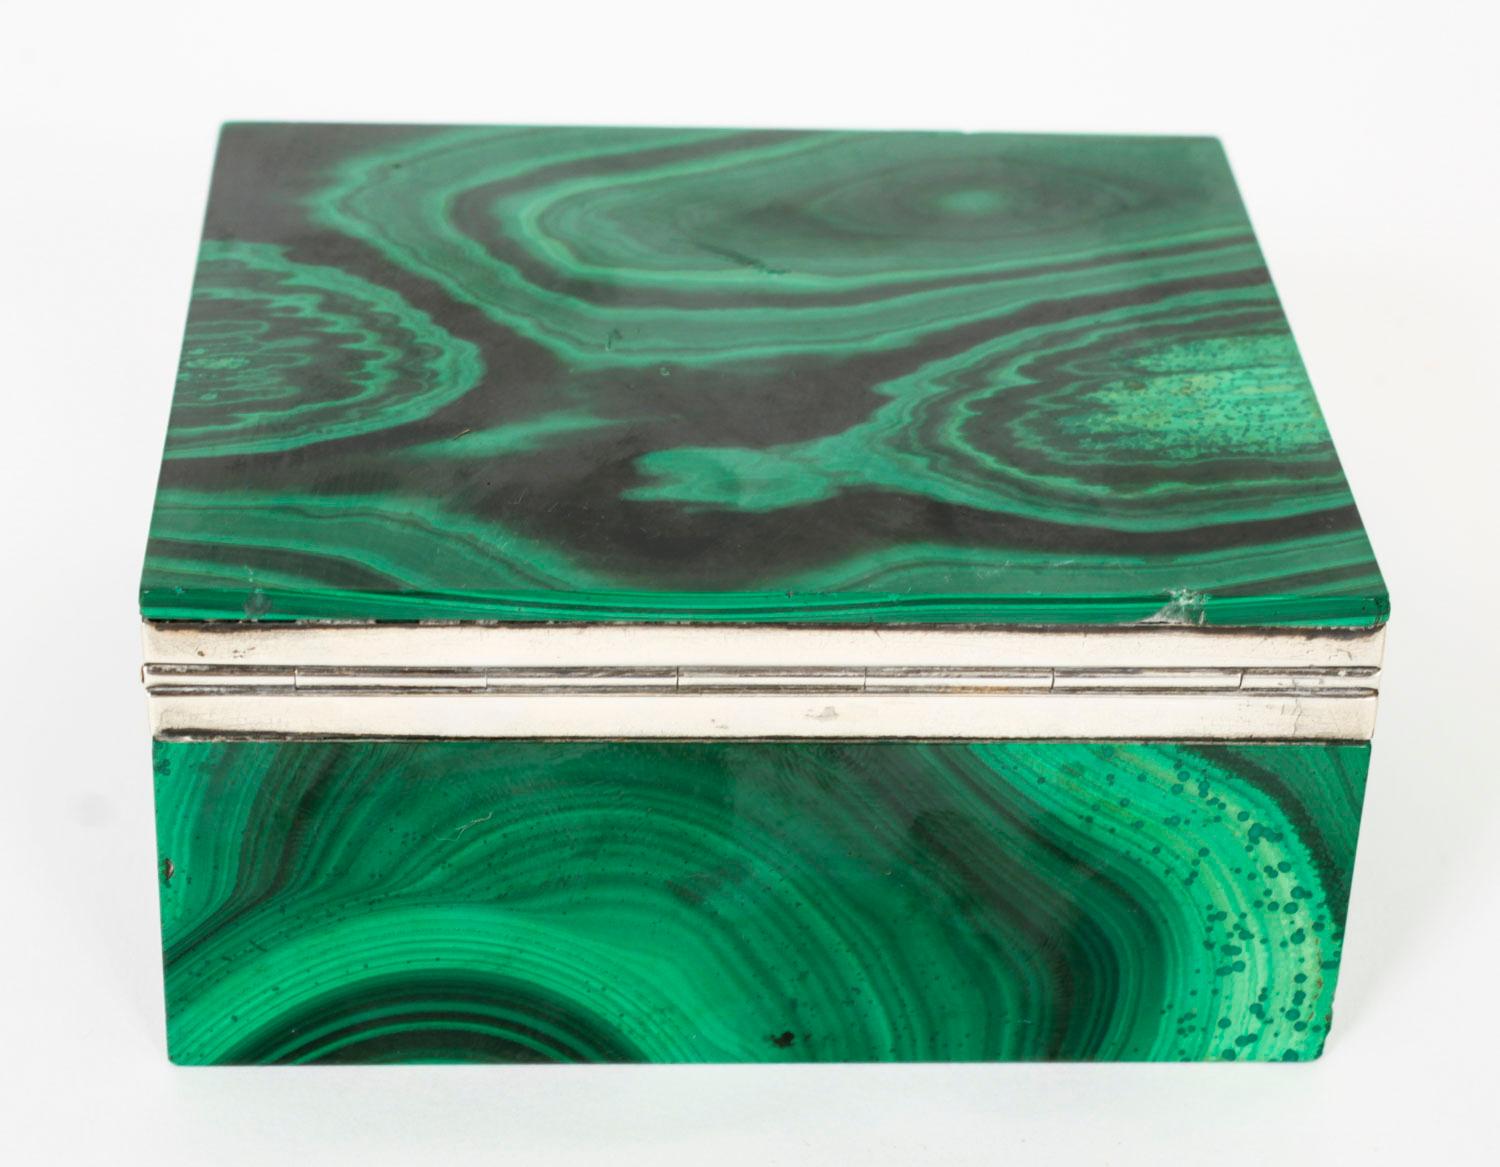 A stunning sterling silver mounted rectangular malachite casket, the mounts bearing hallmarks for Geo Betjemann & Sons Ltd, London 1925.

Condition:
In really excellent condition having been beautifully cleaned  in our workshops.

Dimensions in